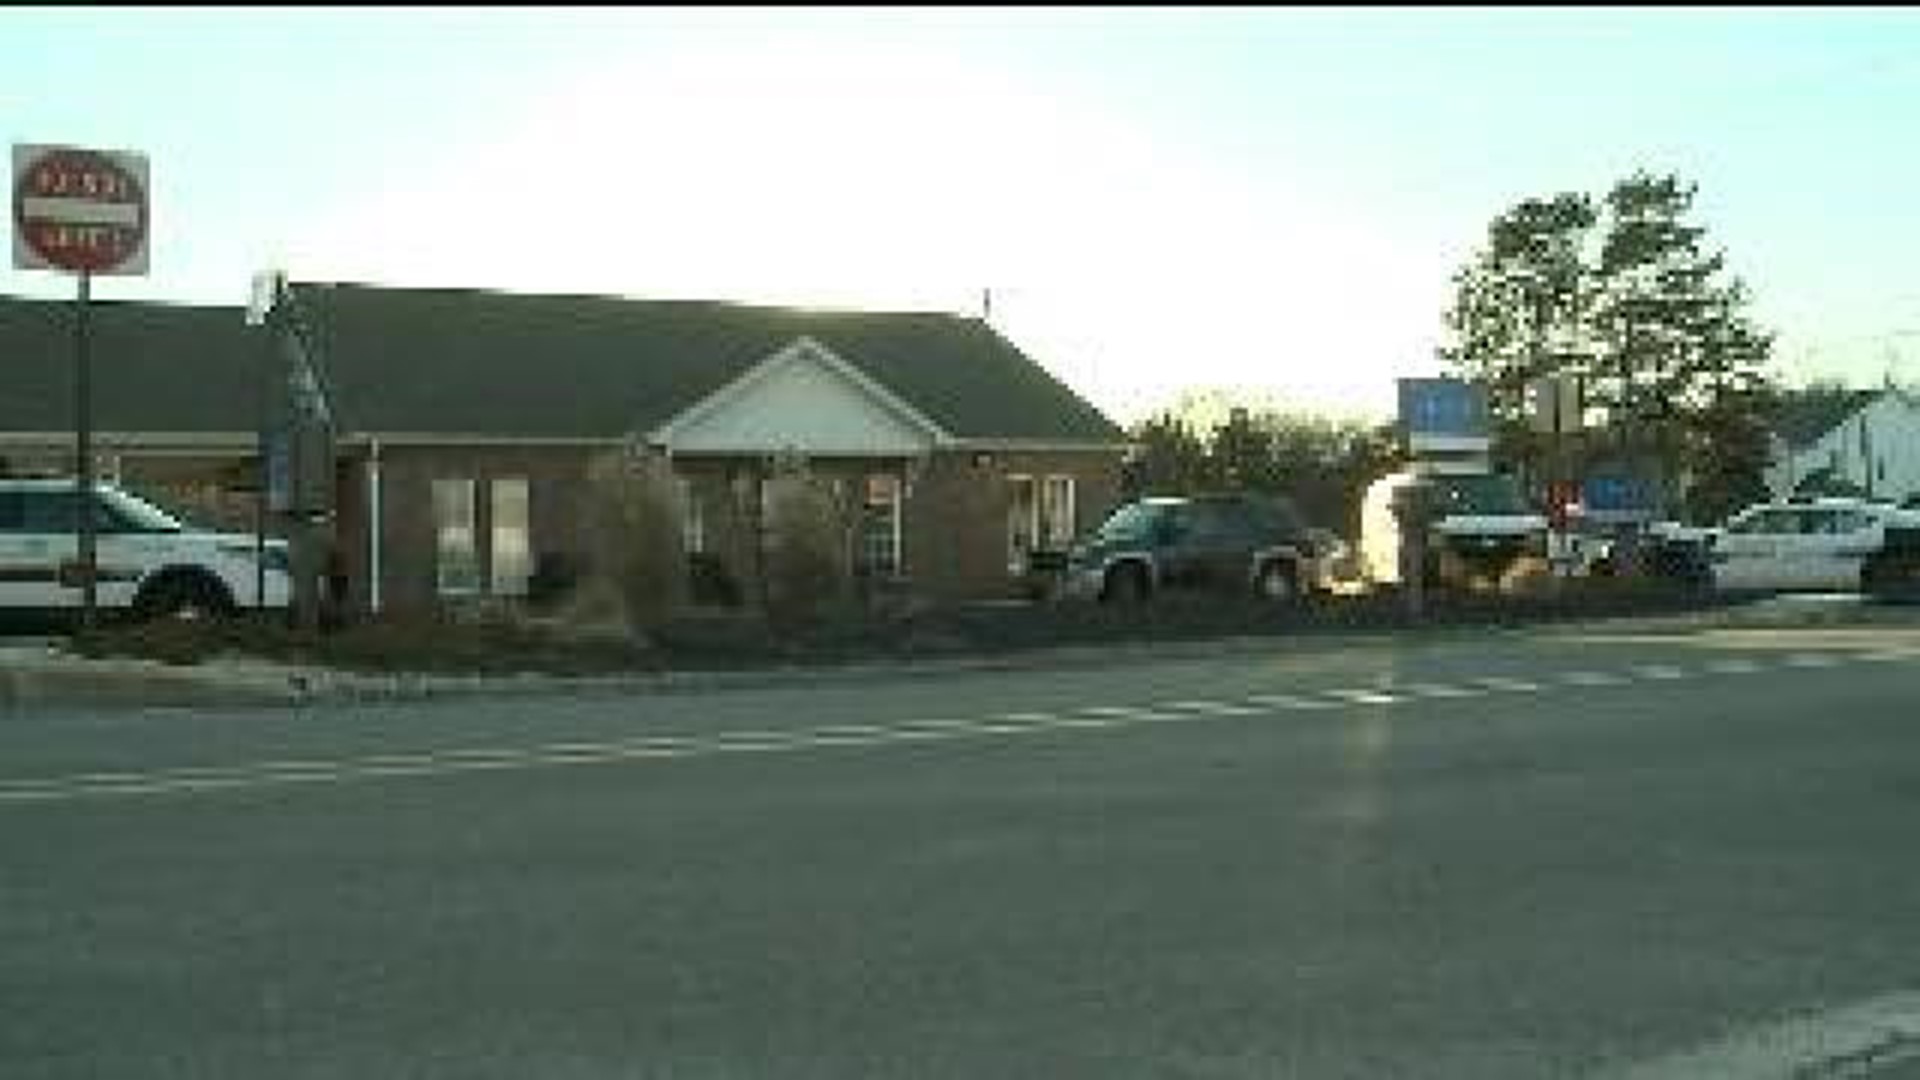 FBI: Bank Employees Tied Up During Robbery